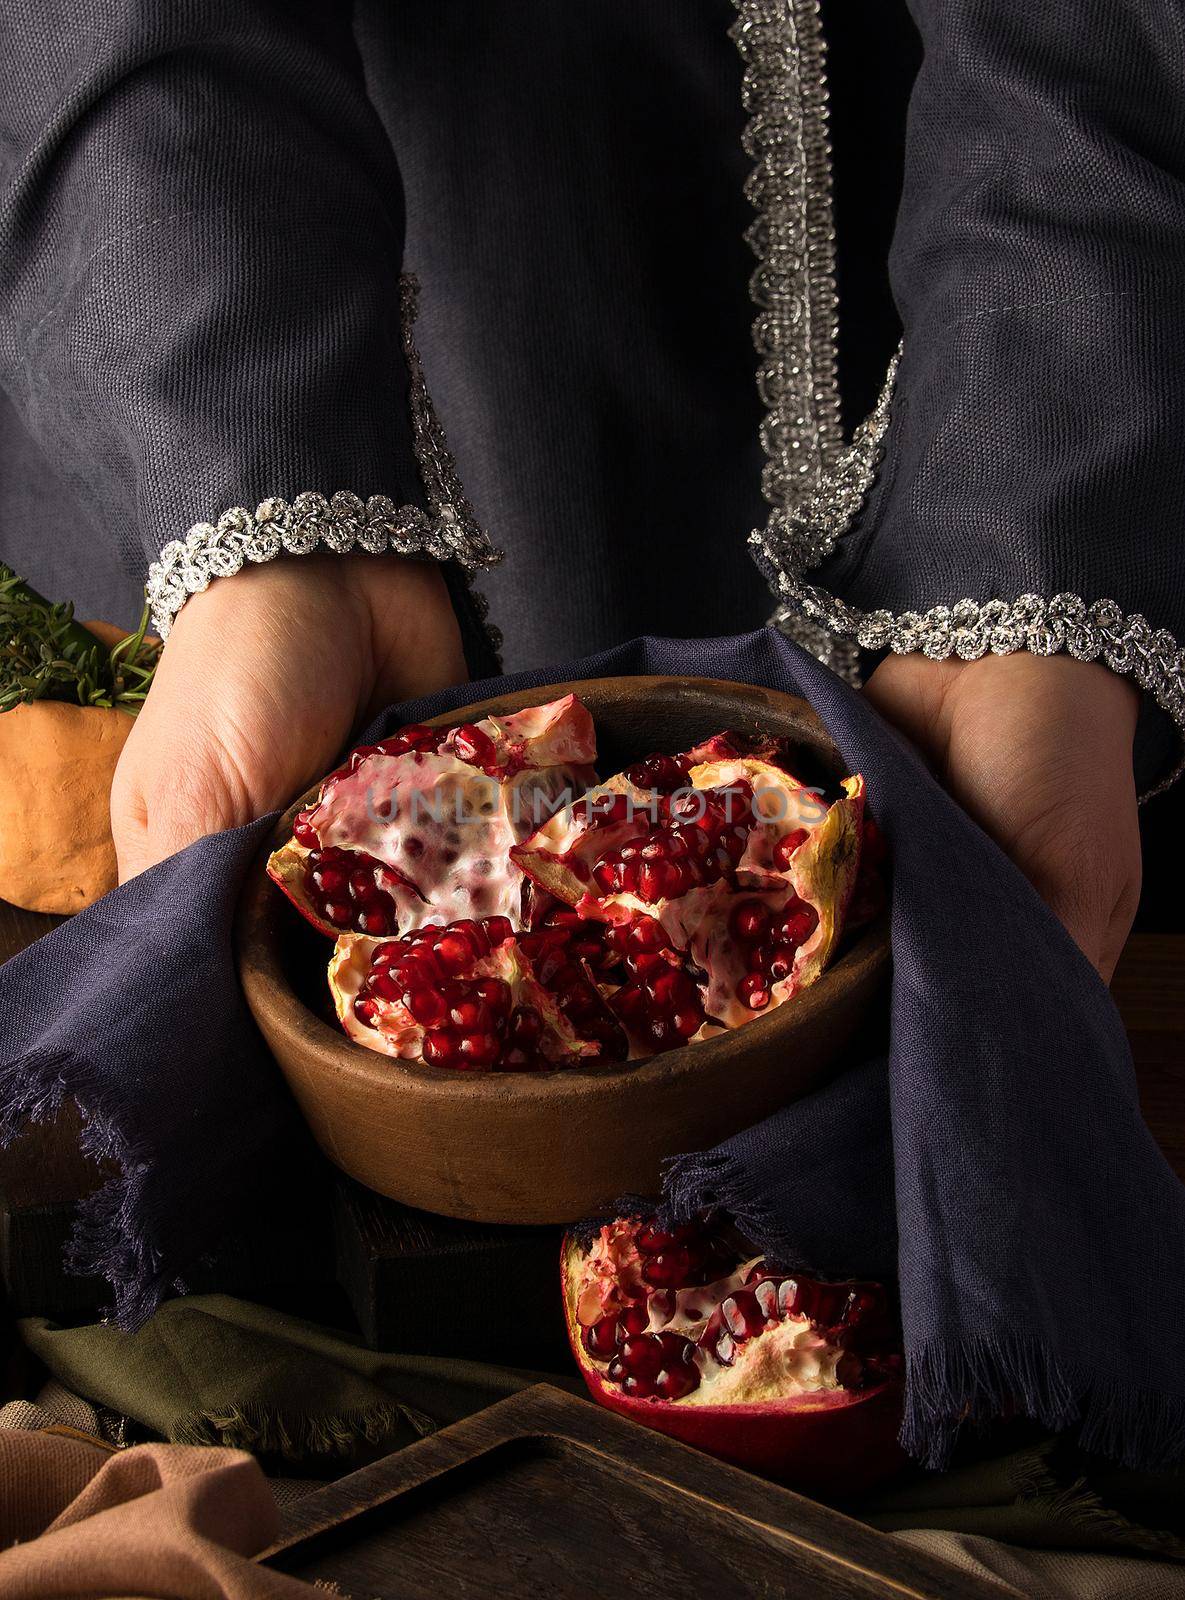 Vertical photo of woman's hands holding a bowl of pomegranate by A_Karim